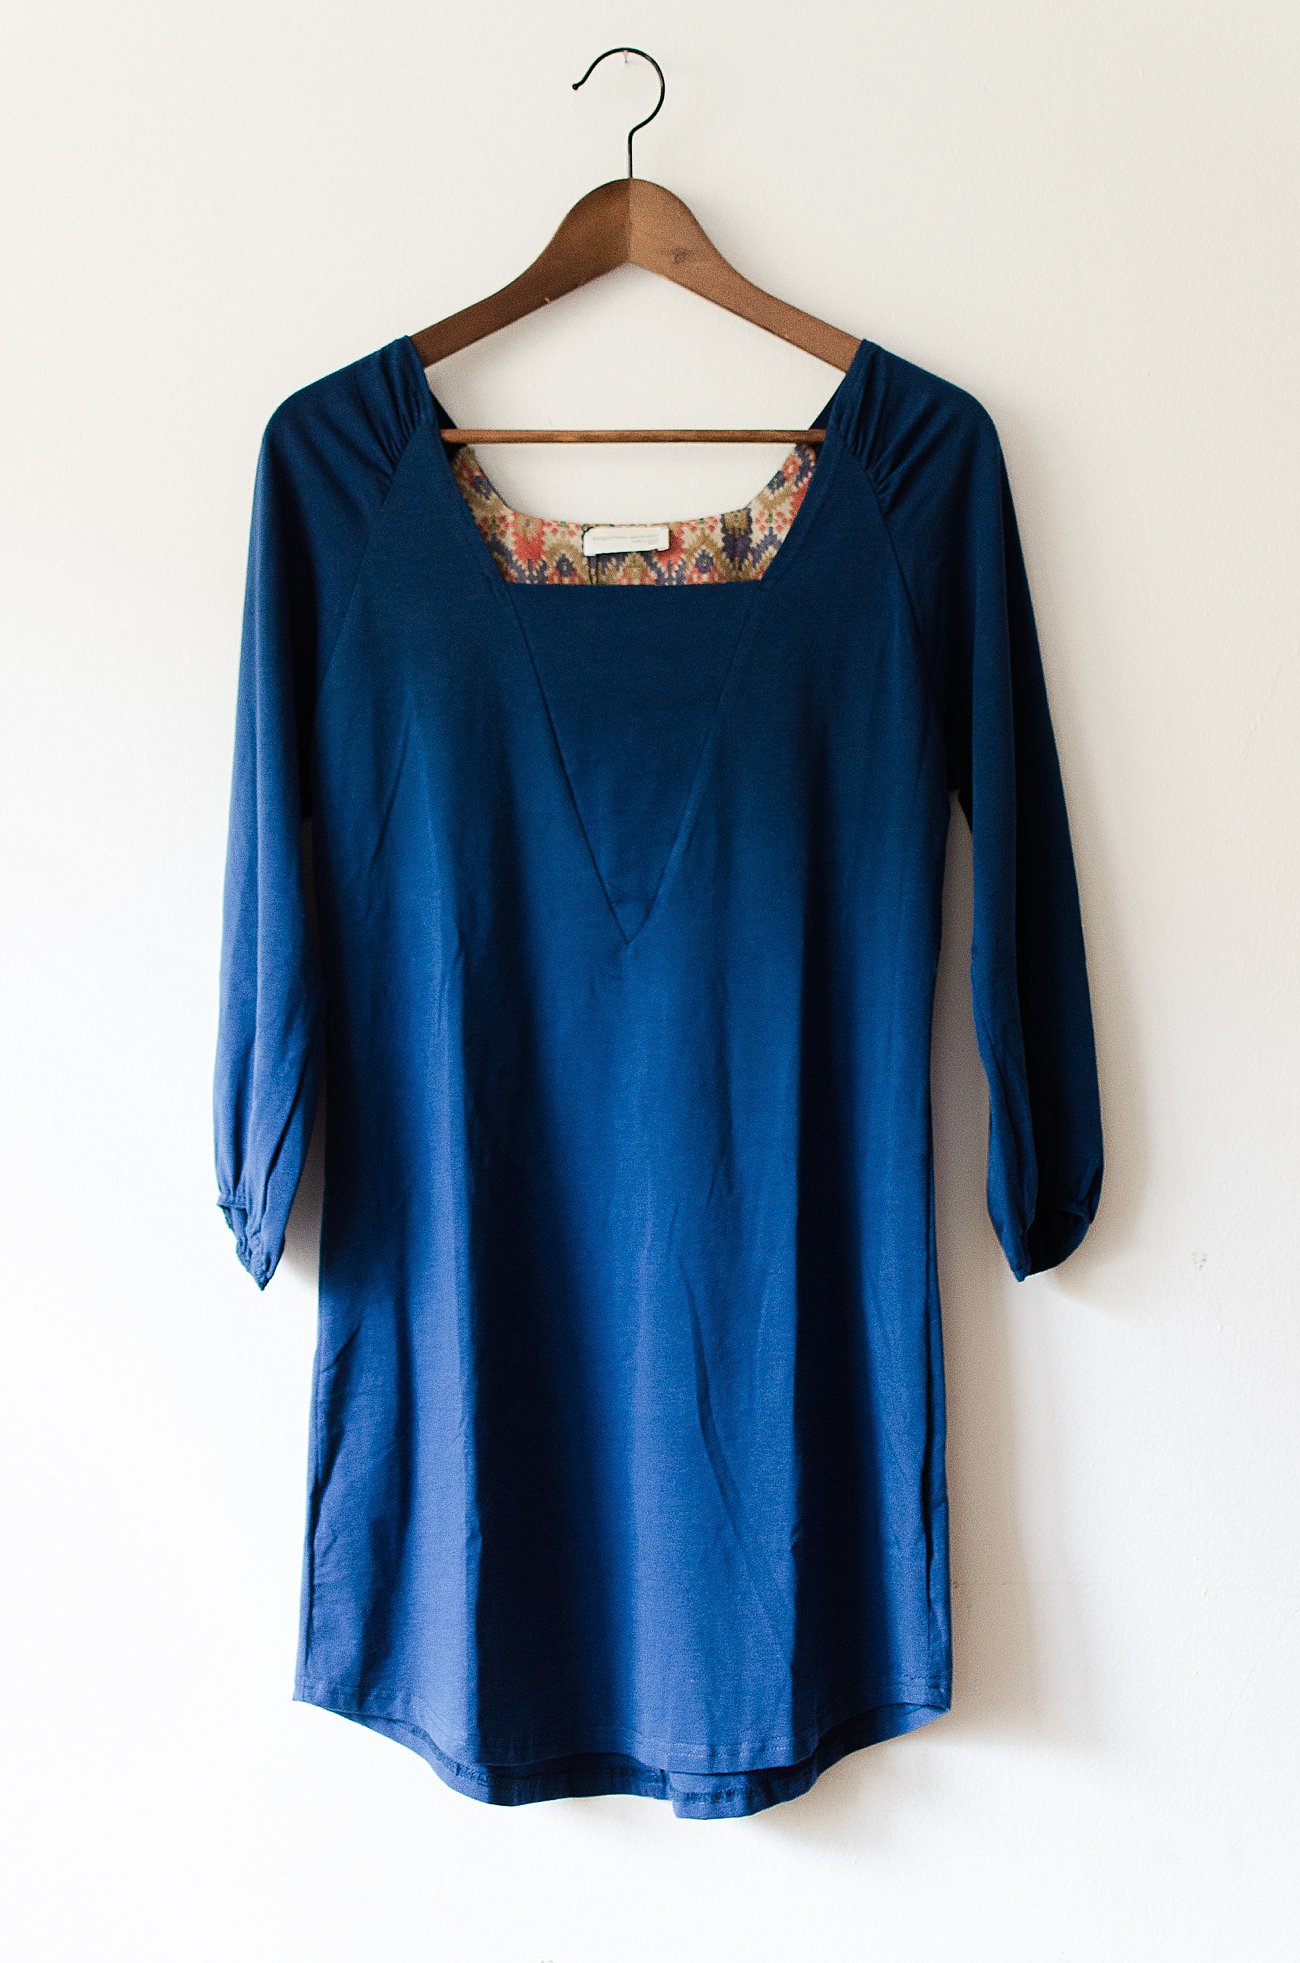 The Elegantees "Molly" Tunic in Estate Blue and Meteorite | Ethical Fashion, Ethically Made, #purchasewithpurpose #fashionforgood, Ethical Fashion Blogger (2)